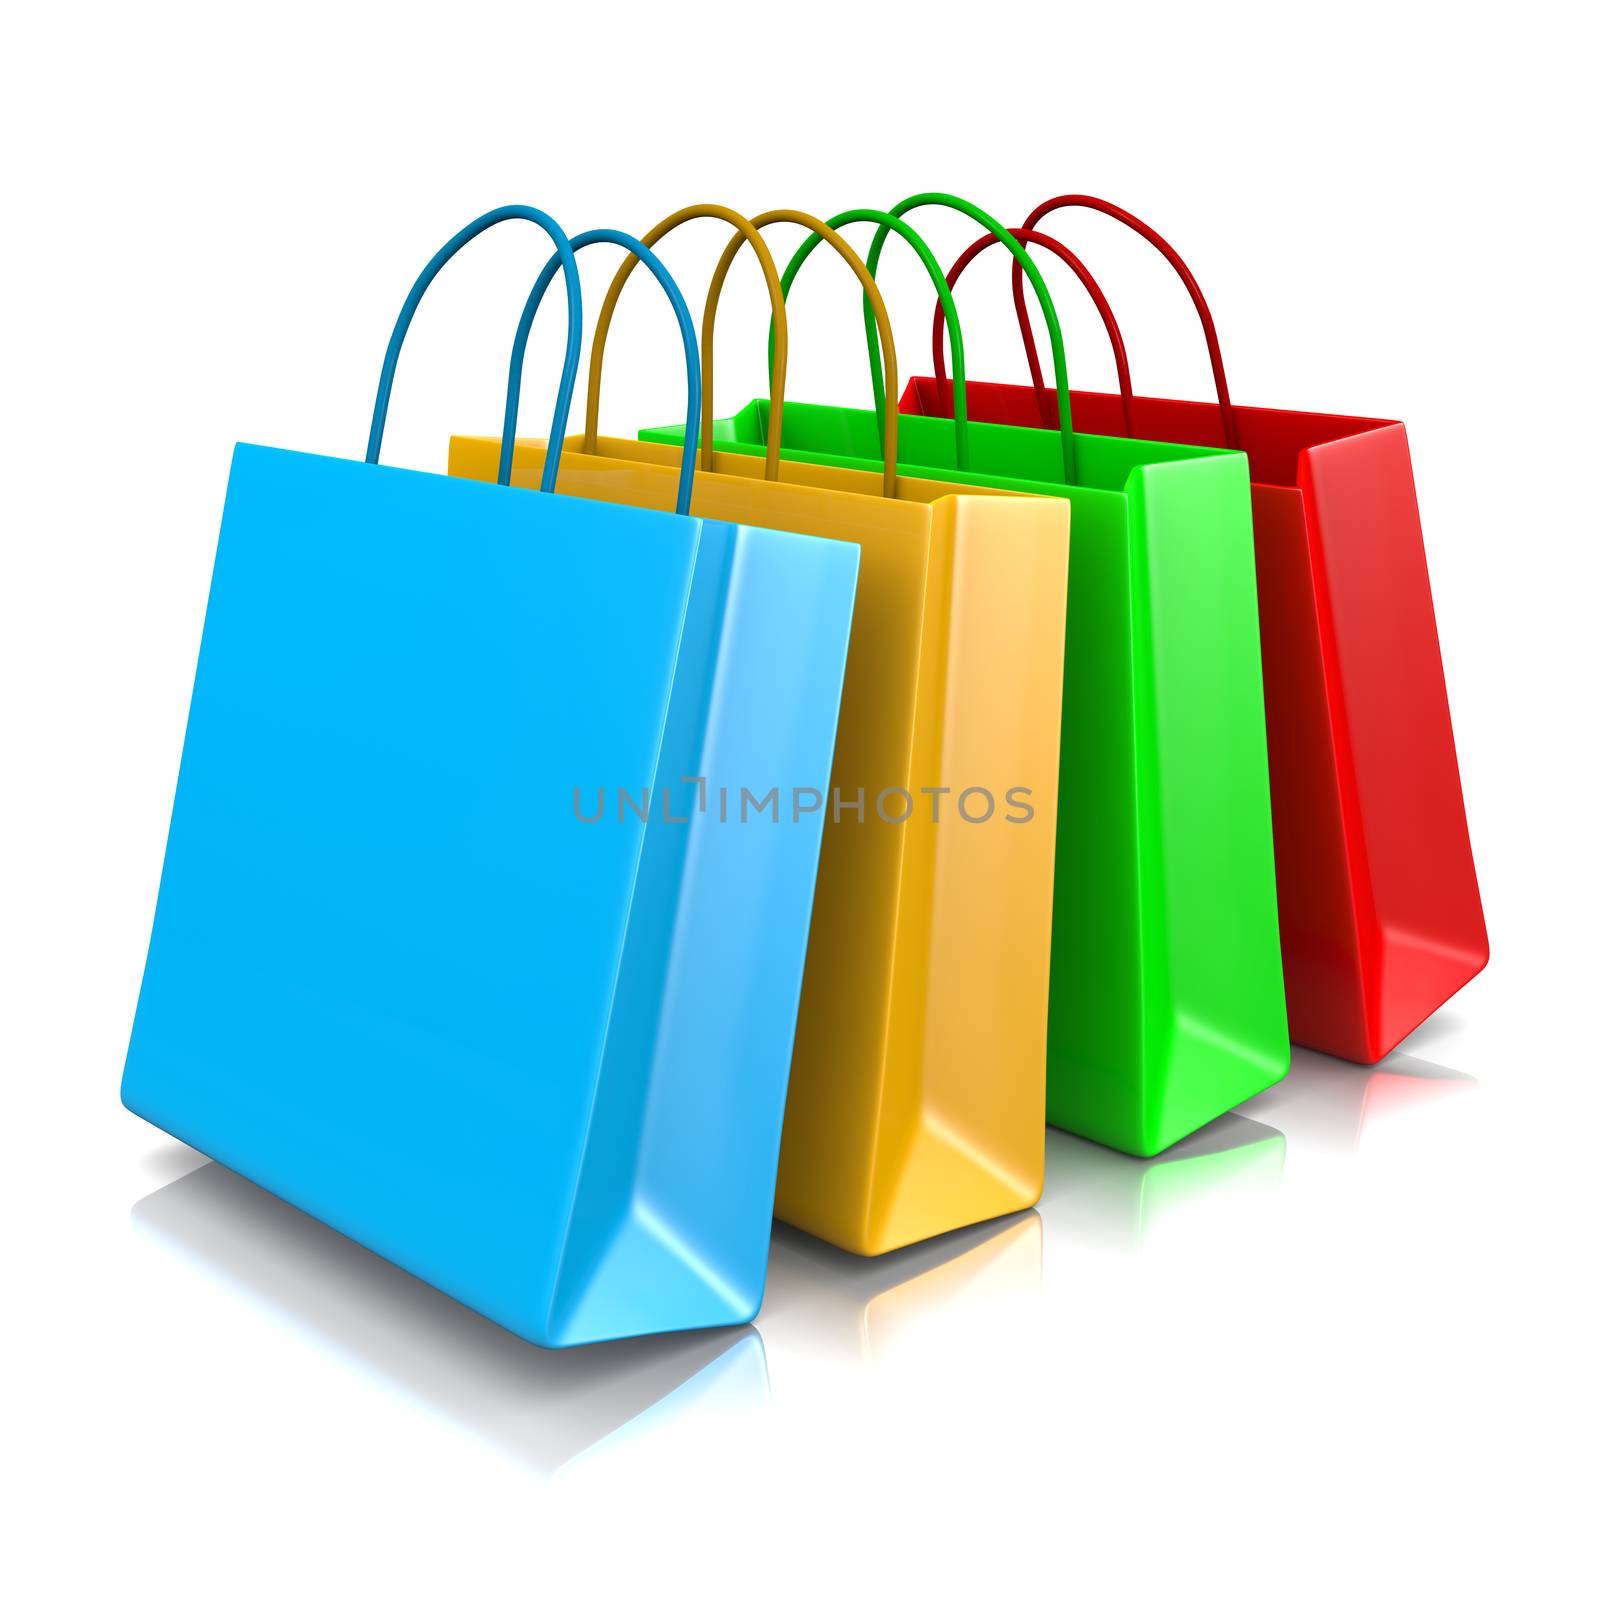 Colorful Shopping Bags Isolated on White Background 3D Illustration